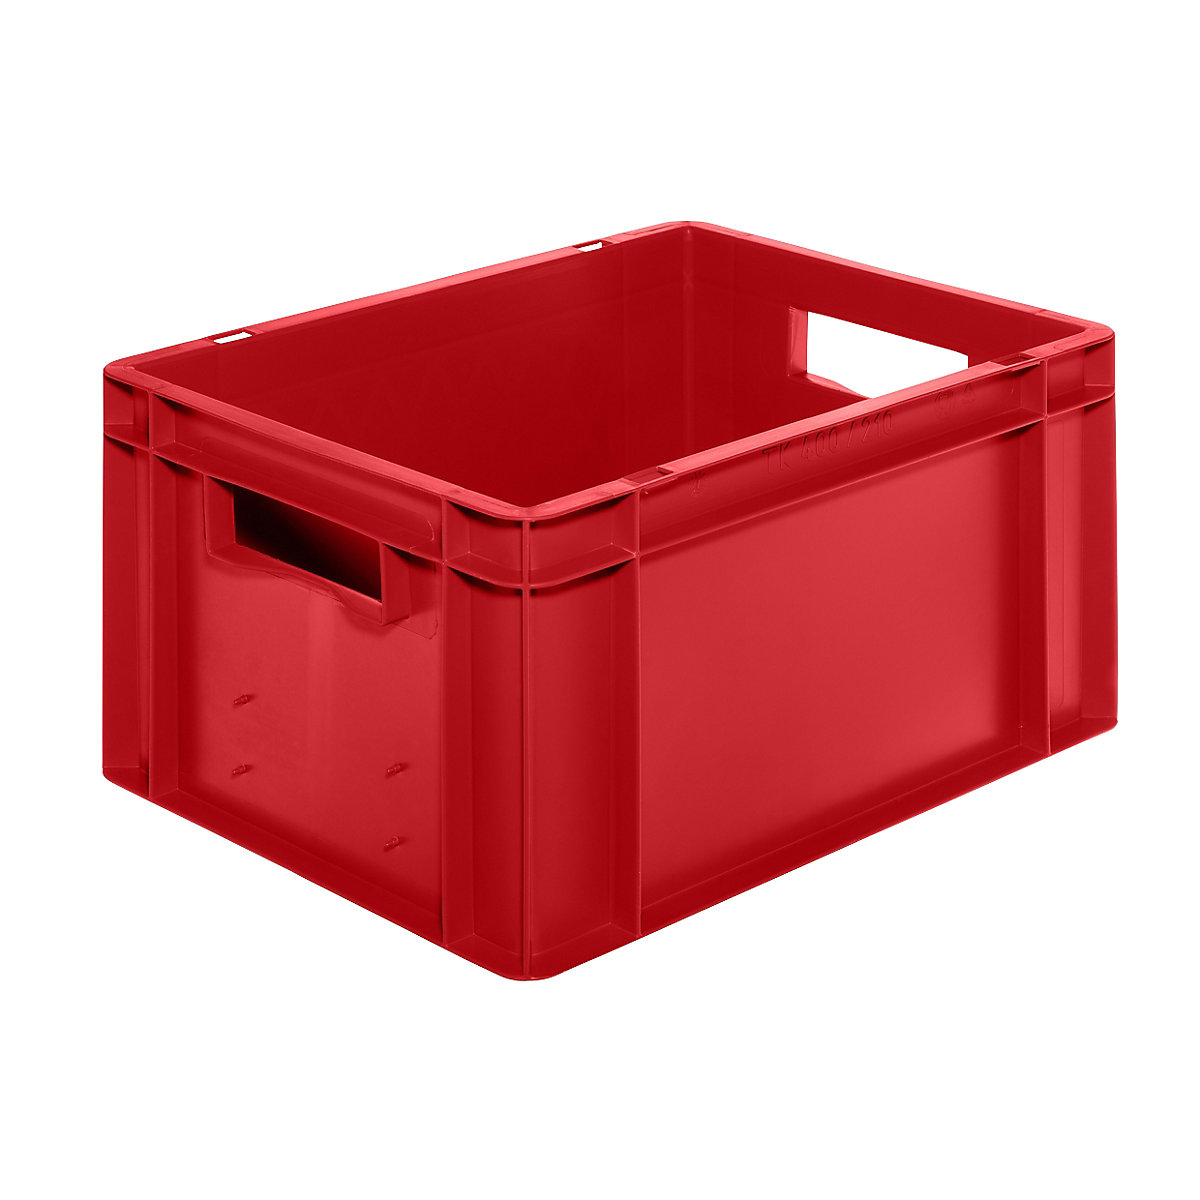 Euro stacking container, closed walls and base, LxWxH 400 x 300 x 210 mm, red, pack of 5